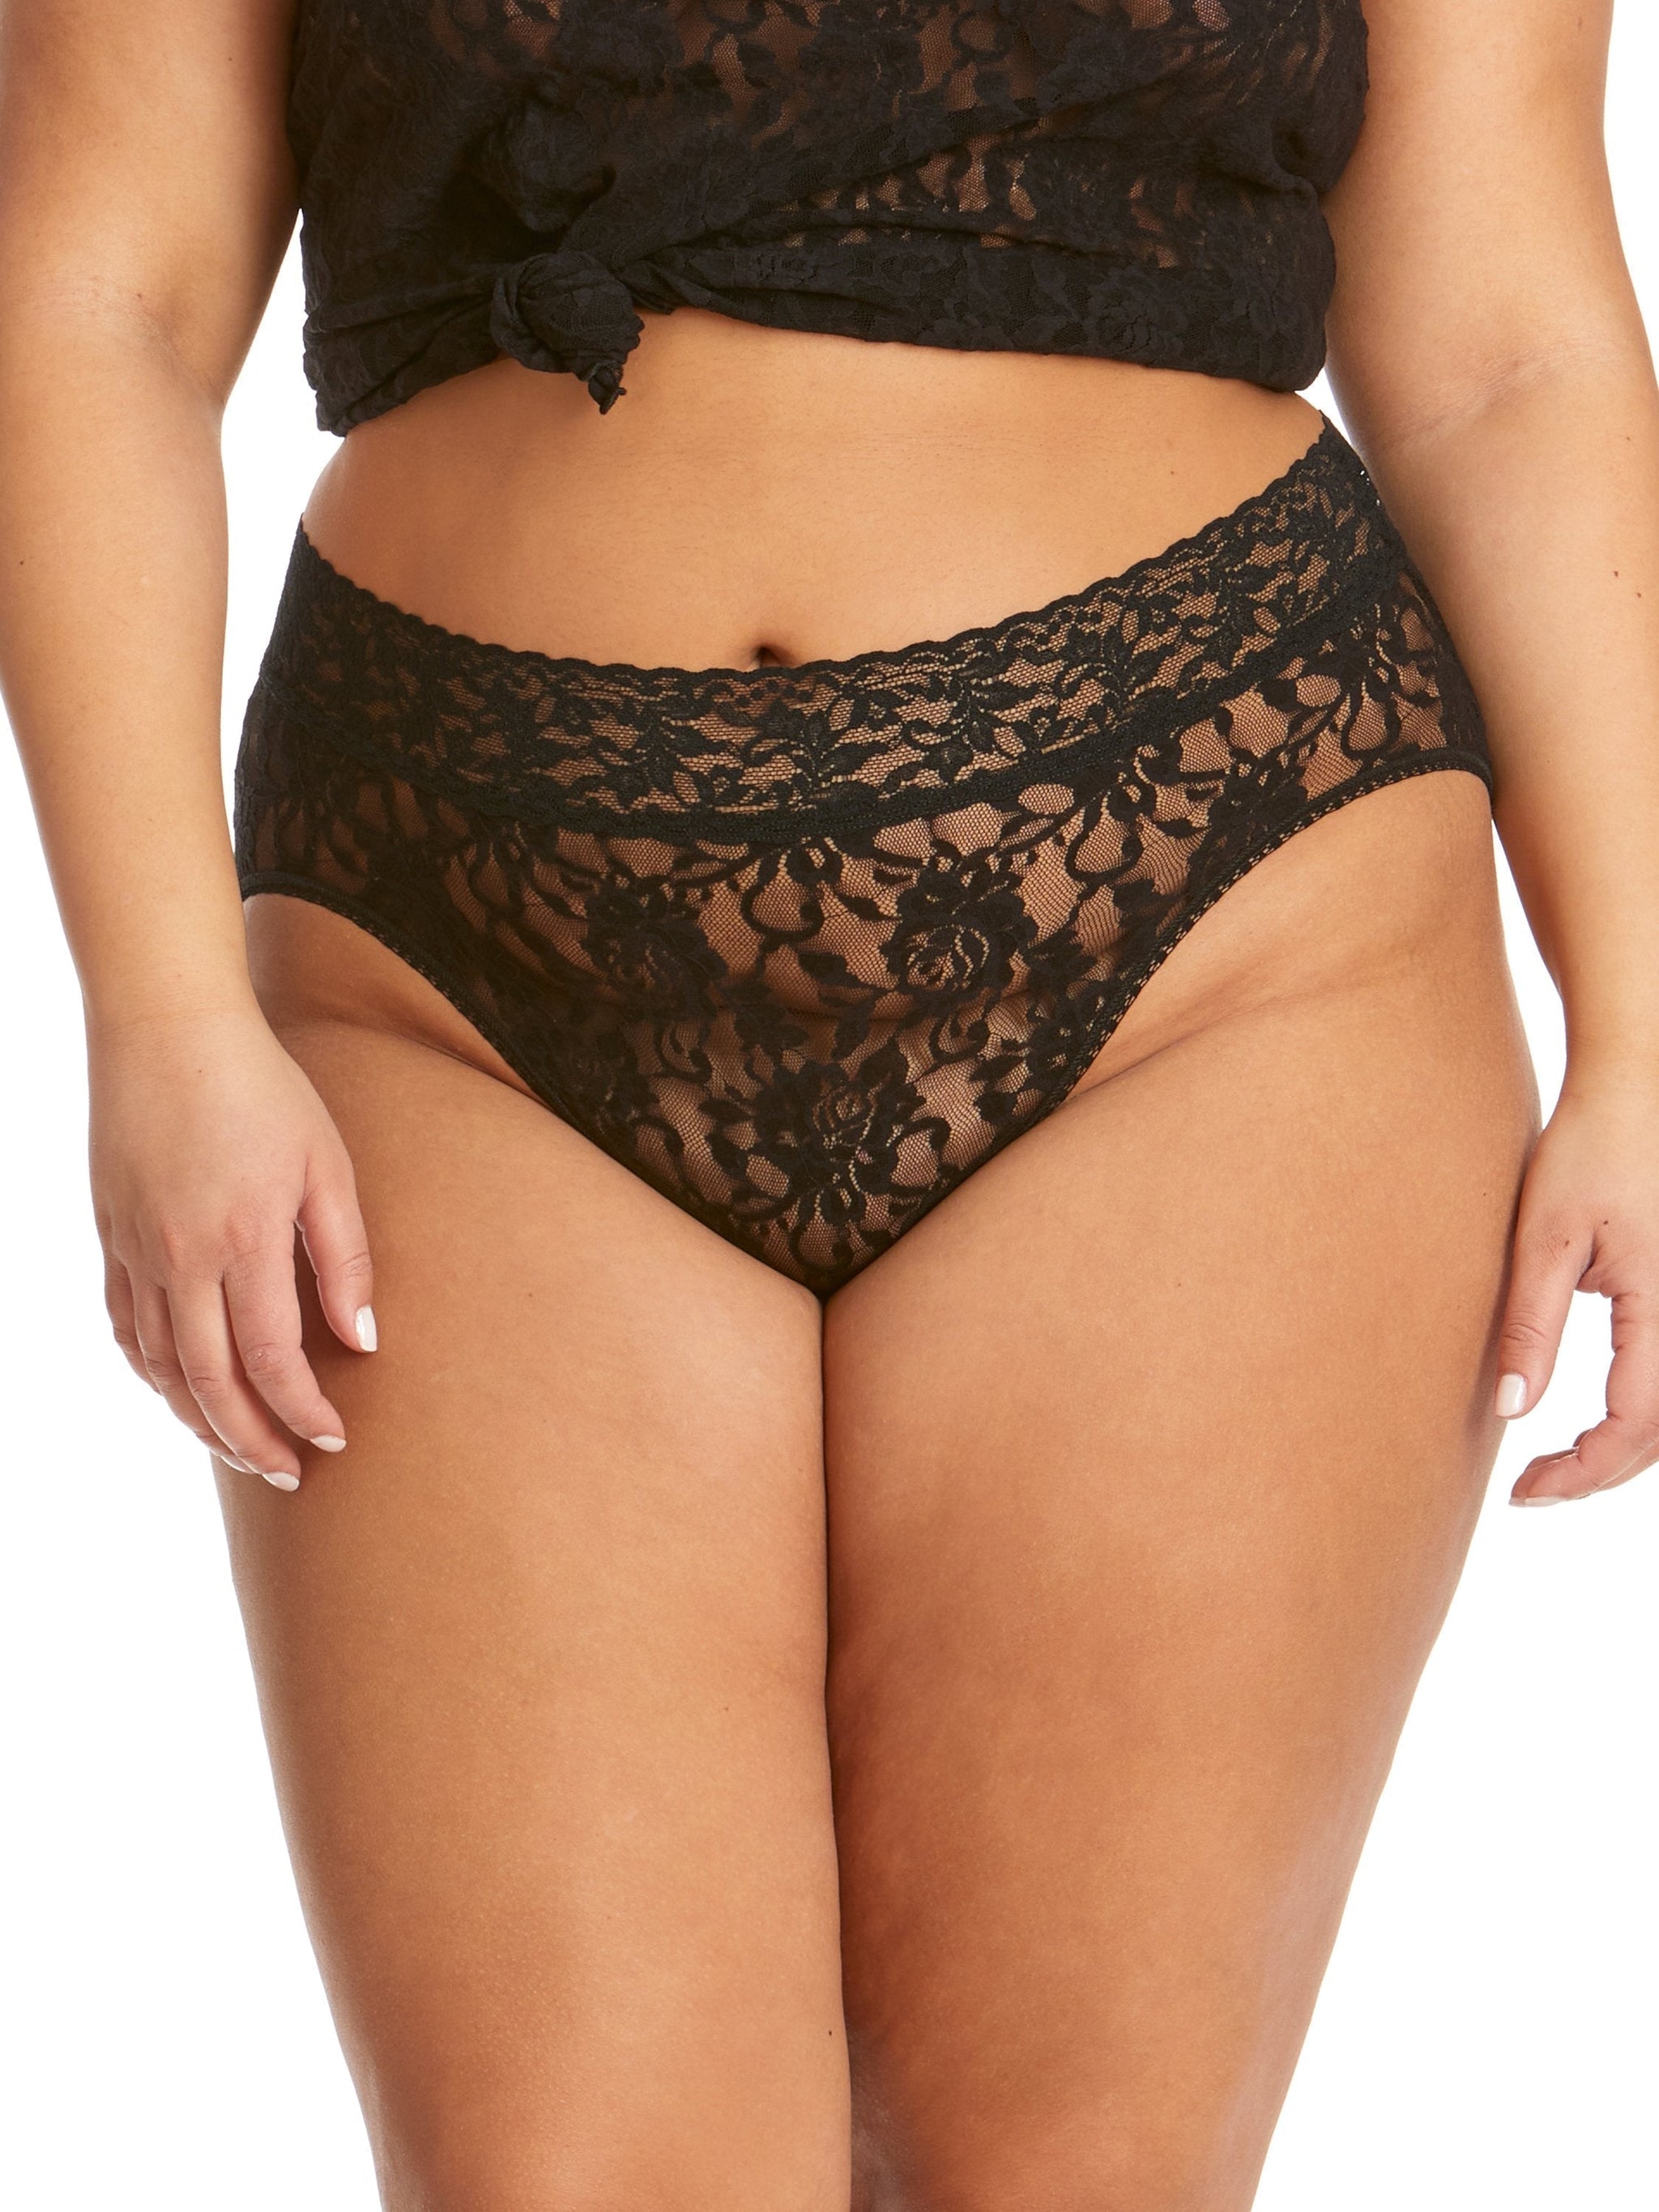 Plus Size Underwear, Extended Sizing Lingerie